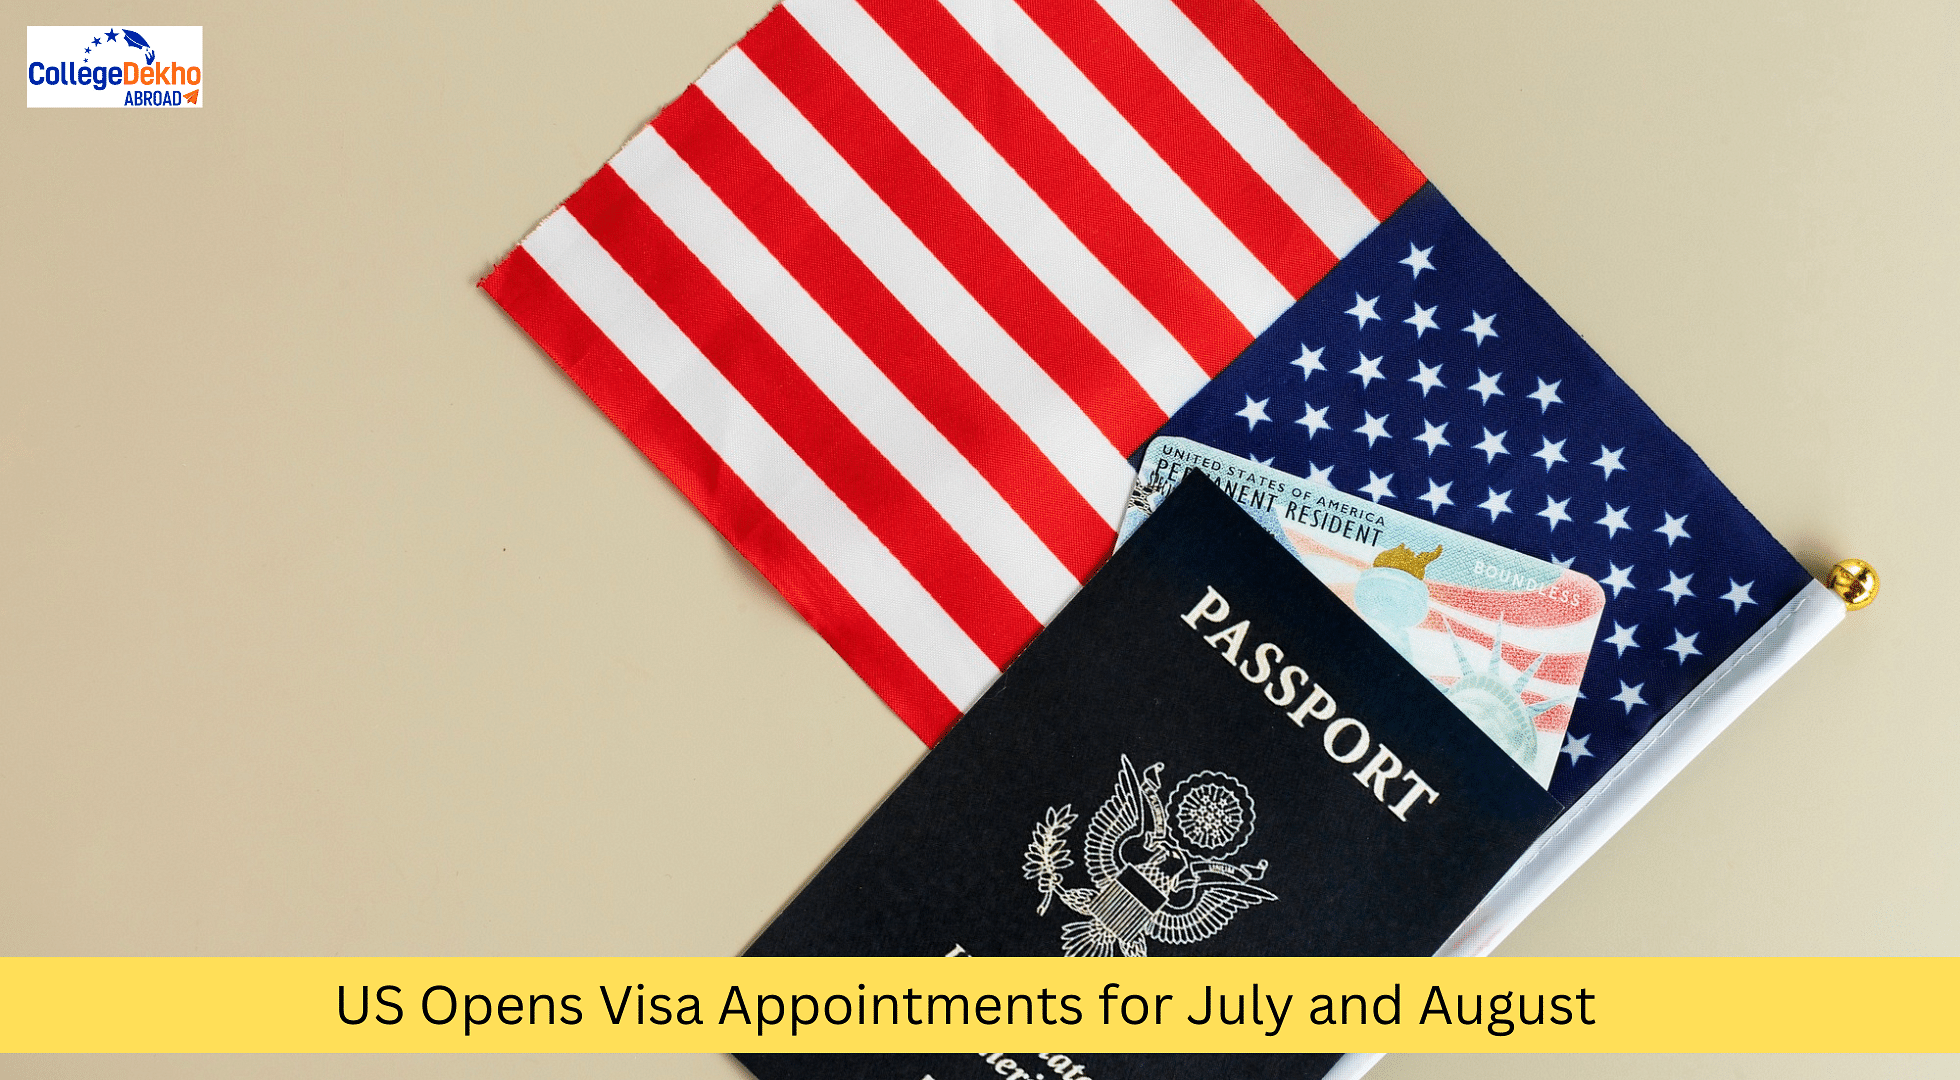 US Opens Visa Appointments for July and August